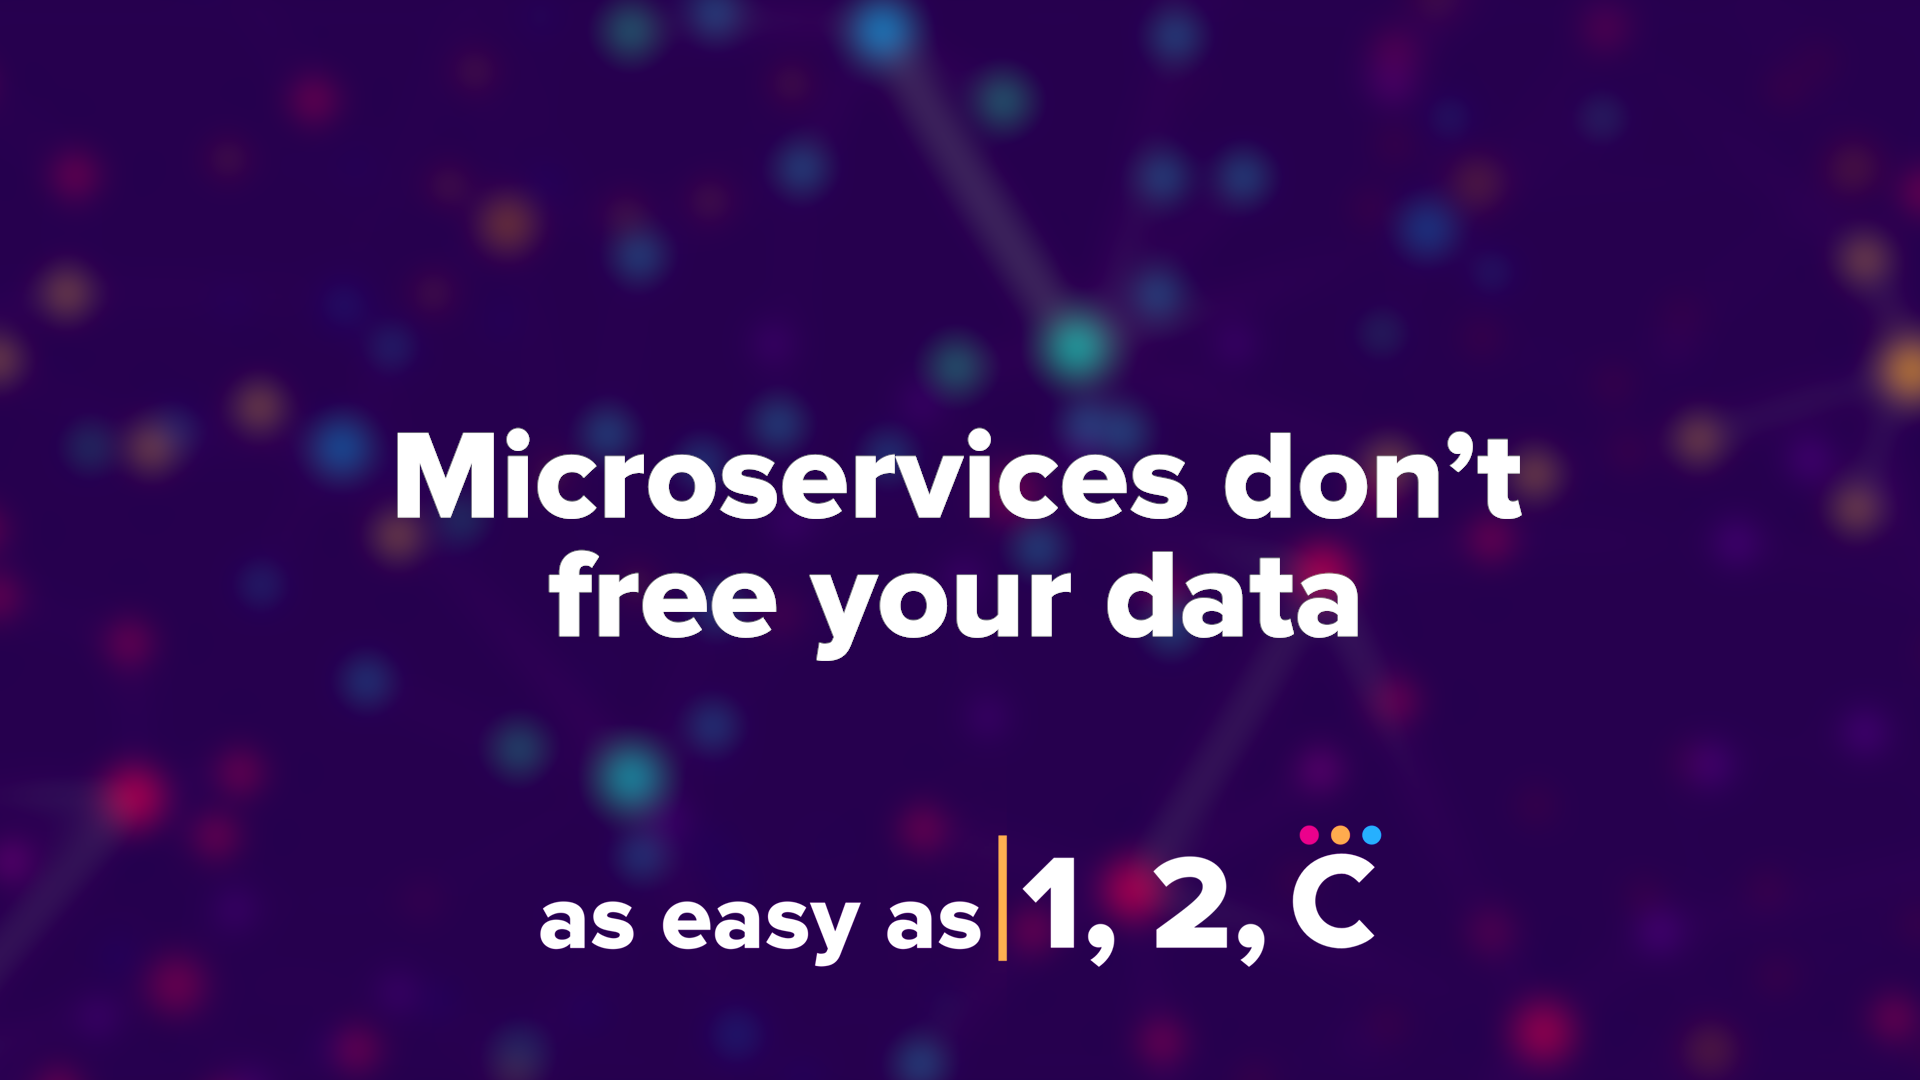 As Easy As 1, 2, C: Microservices Don't Free Your Data!